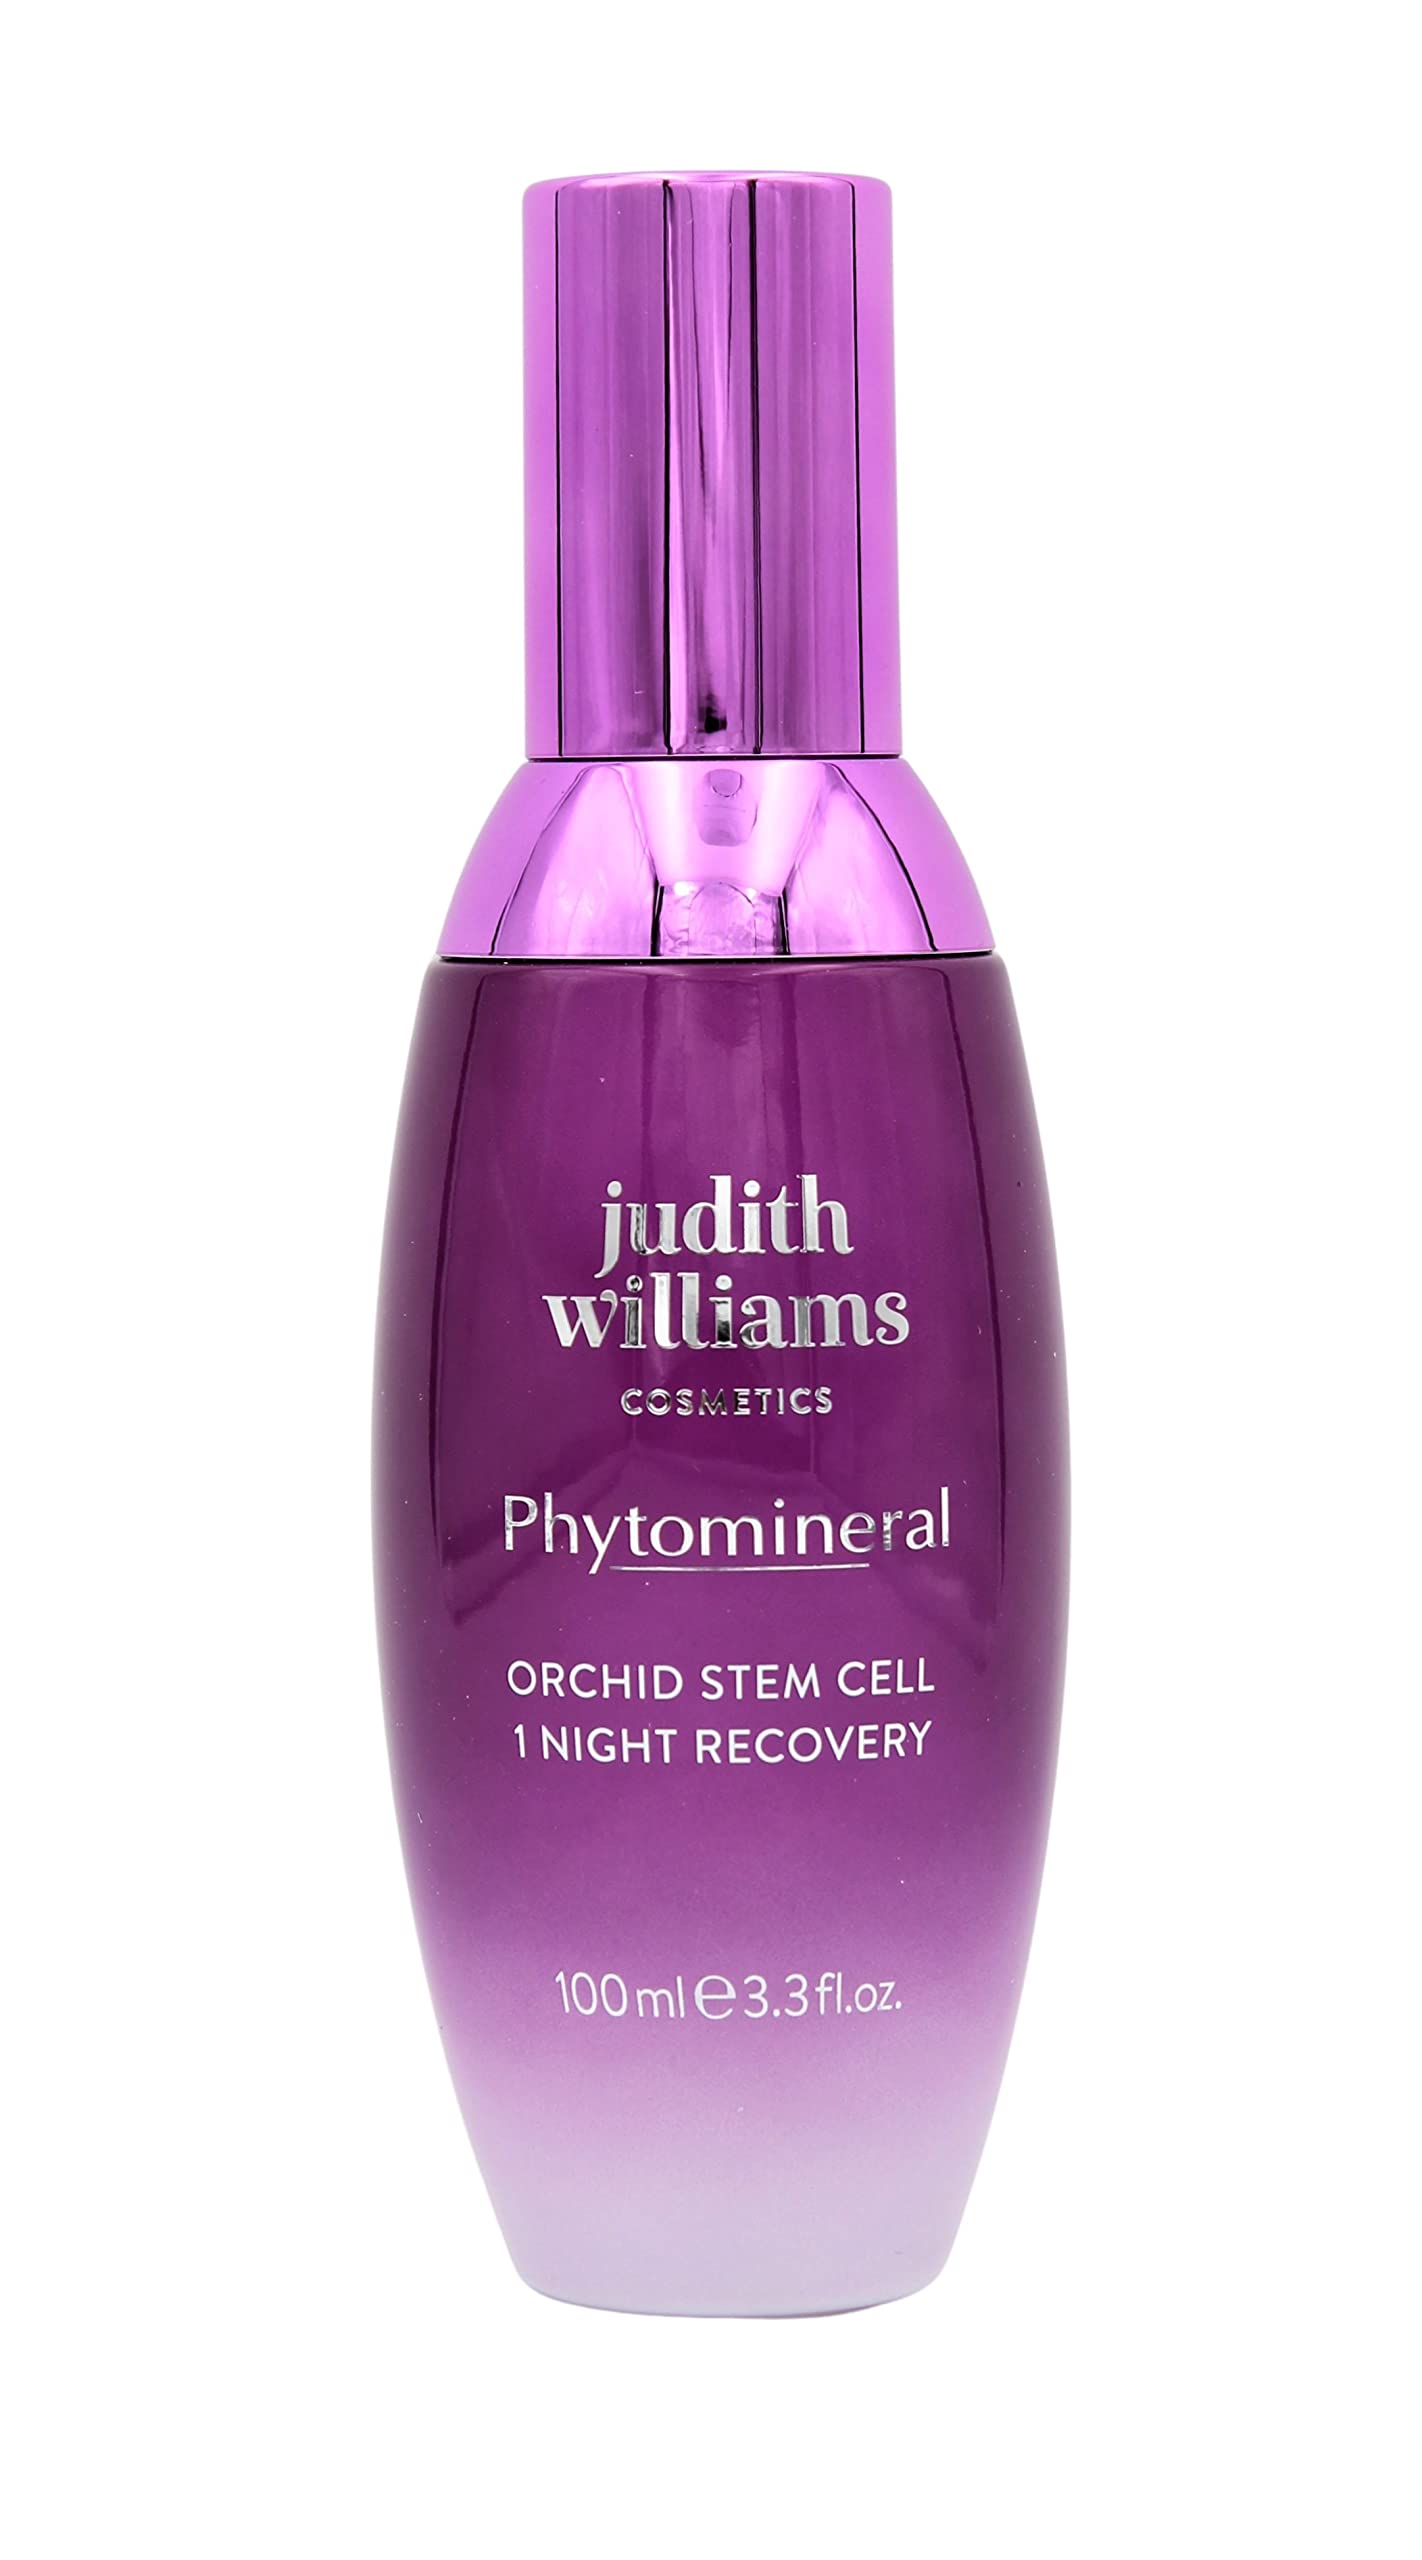 Judith Williams Phytomineral Orchid Stem Cell Night Recovery 100ml